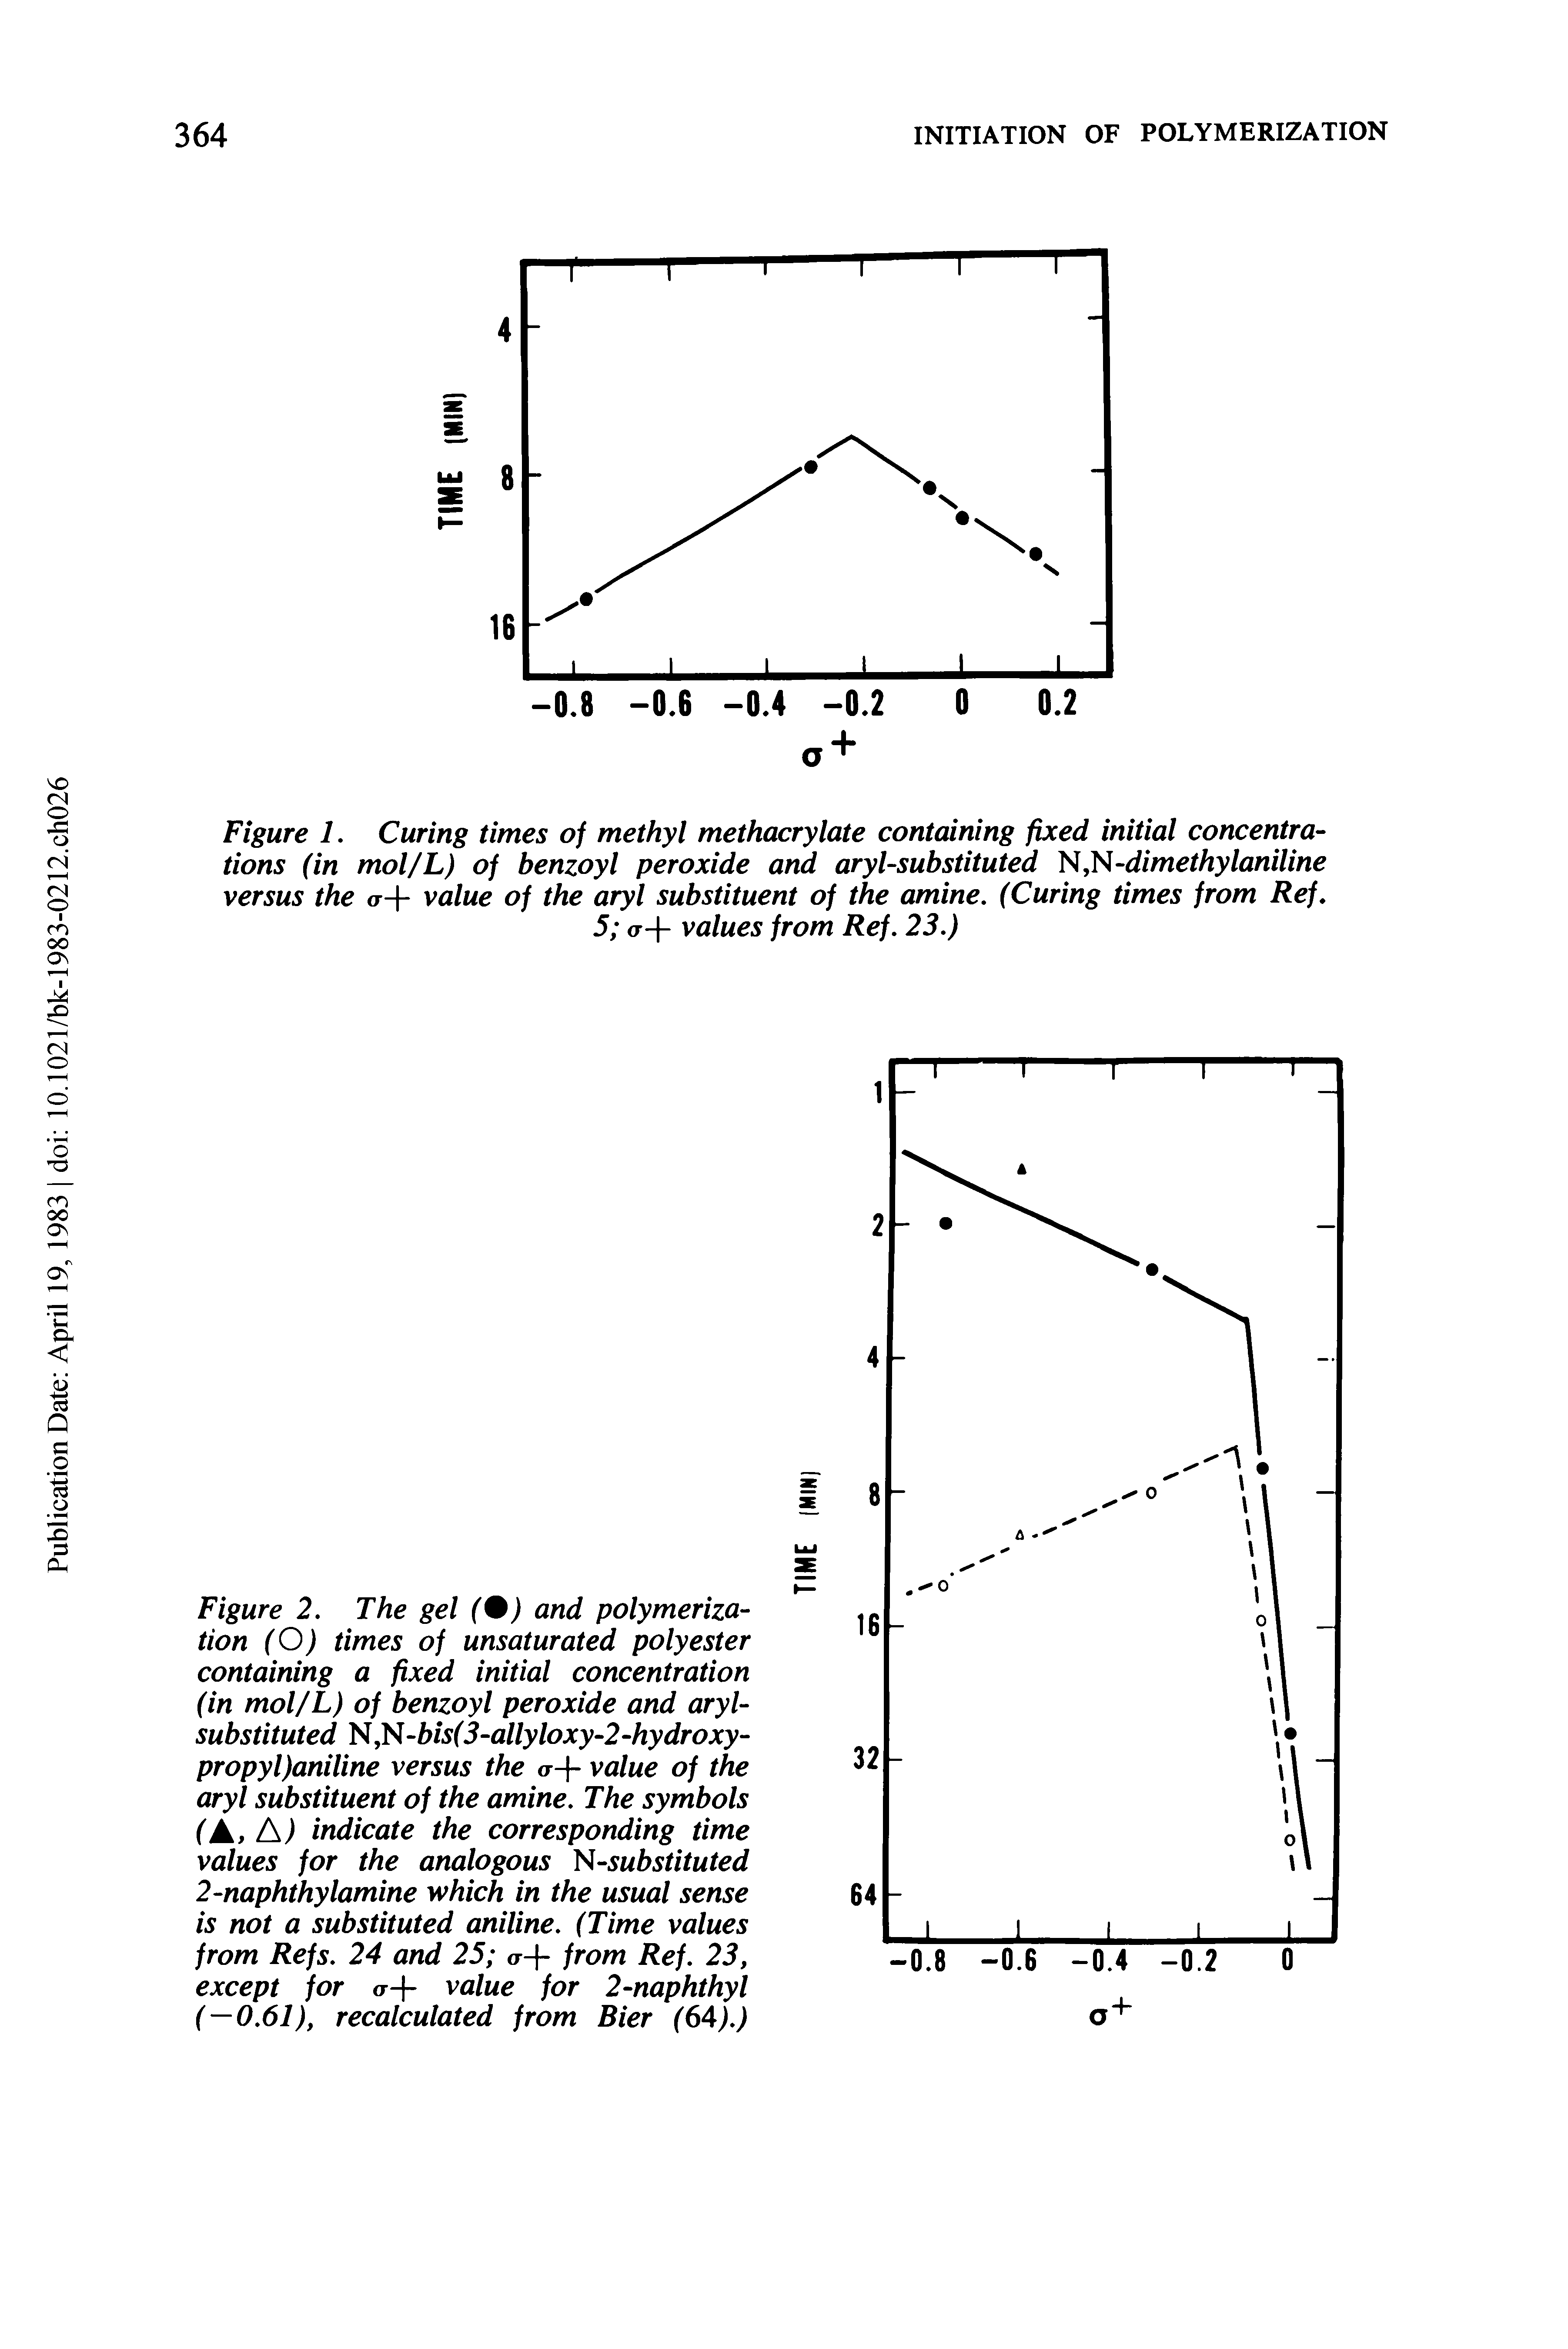 Figure 2. The gel (%) and polymerization (O) times of unsaturated polyester containing a fixed initial concentration (in mol/L) of benzoyl peroxide and aryl-substituted N,N-bis(3-allyloxy-2-hydroxy-propyl)aniline versus the (t+ value of the aryl substituent of the amine. The symbols (A, A) indicate the corresponding time values for the analogous N-substituted 2-naphthylamine which in the usual sense is not a substituted aniline. (Time values from Refs. 24 and 25 (t+ from Ref. 23, except for (t+ value for 2-naphthyl (—0.61), recalculated from Bier (64).)...